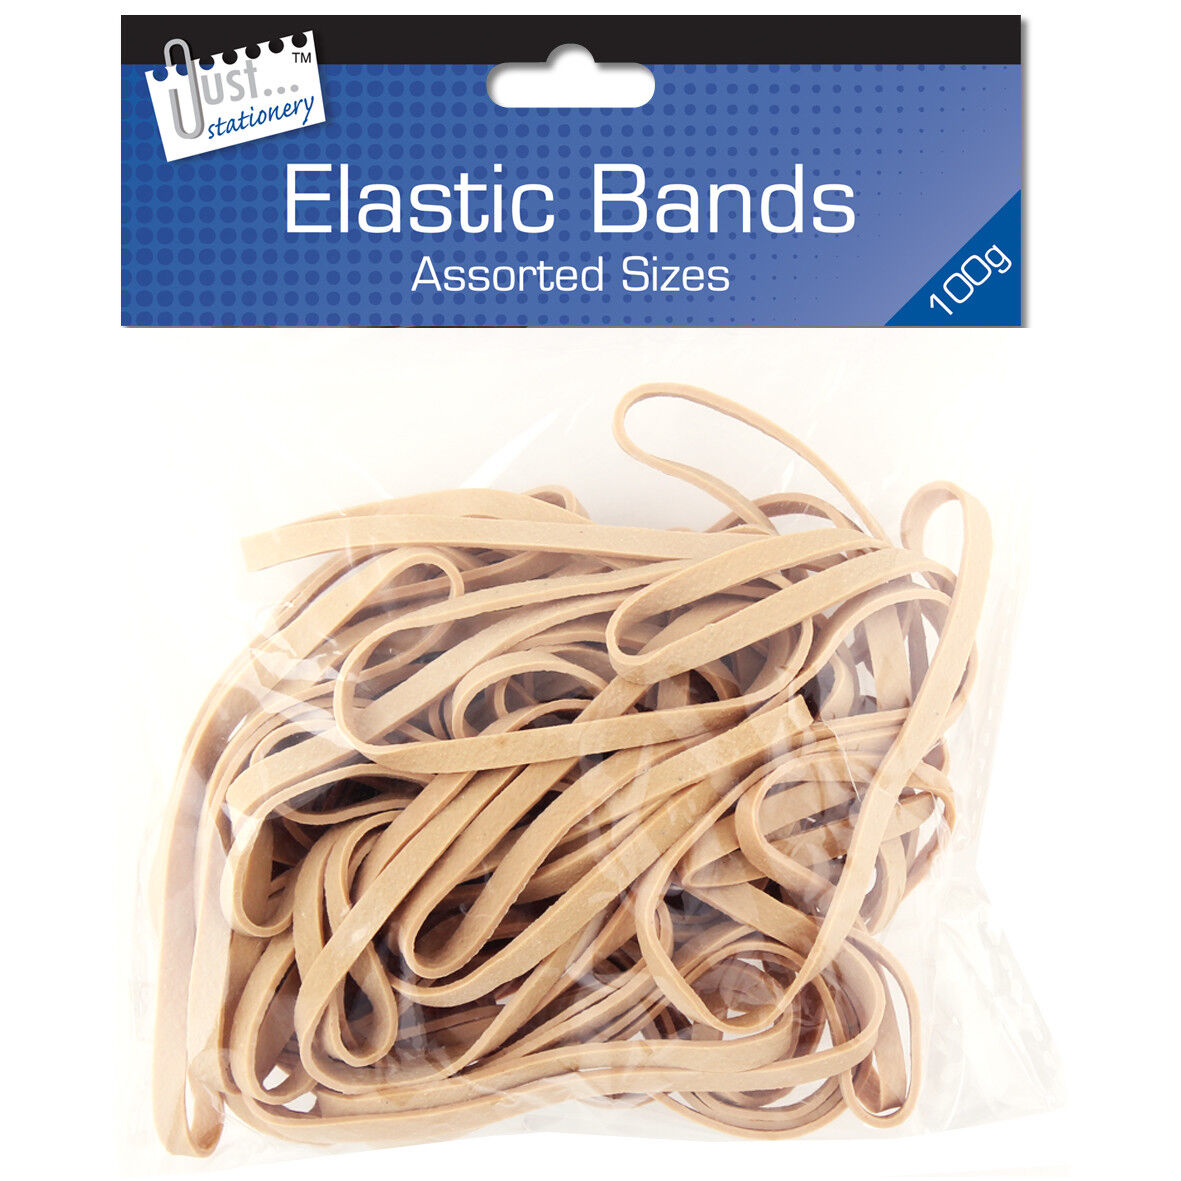 100g Strong Elastic Rubber Bands Assorted Size for Home School Office JUMBO eBay